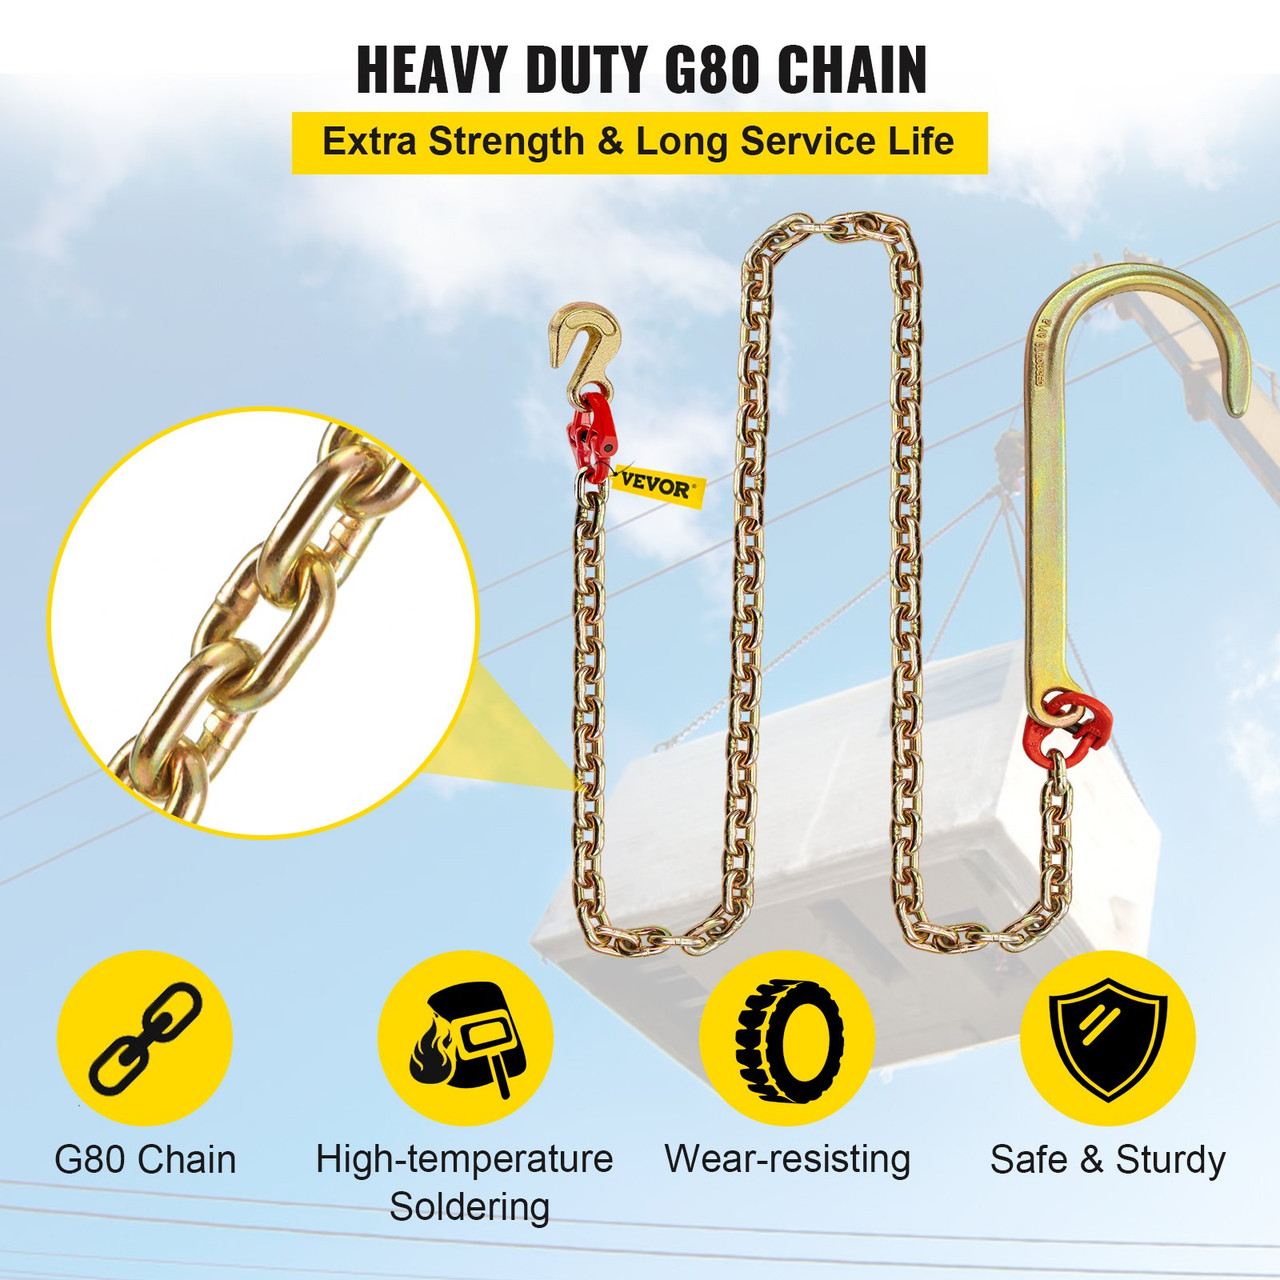 J Hook Chain, 5/16 in x 6 ft Tow Chain Bridle, Grade 80 J Hook Transport Chain, 9260 Lbs Break Strength with j Hook & Grab Hook, Tow Hooks for Trucks, Heavy Duty J Hook and Chain Shorteners